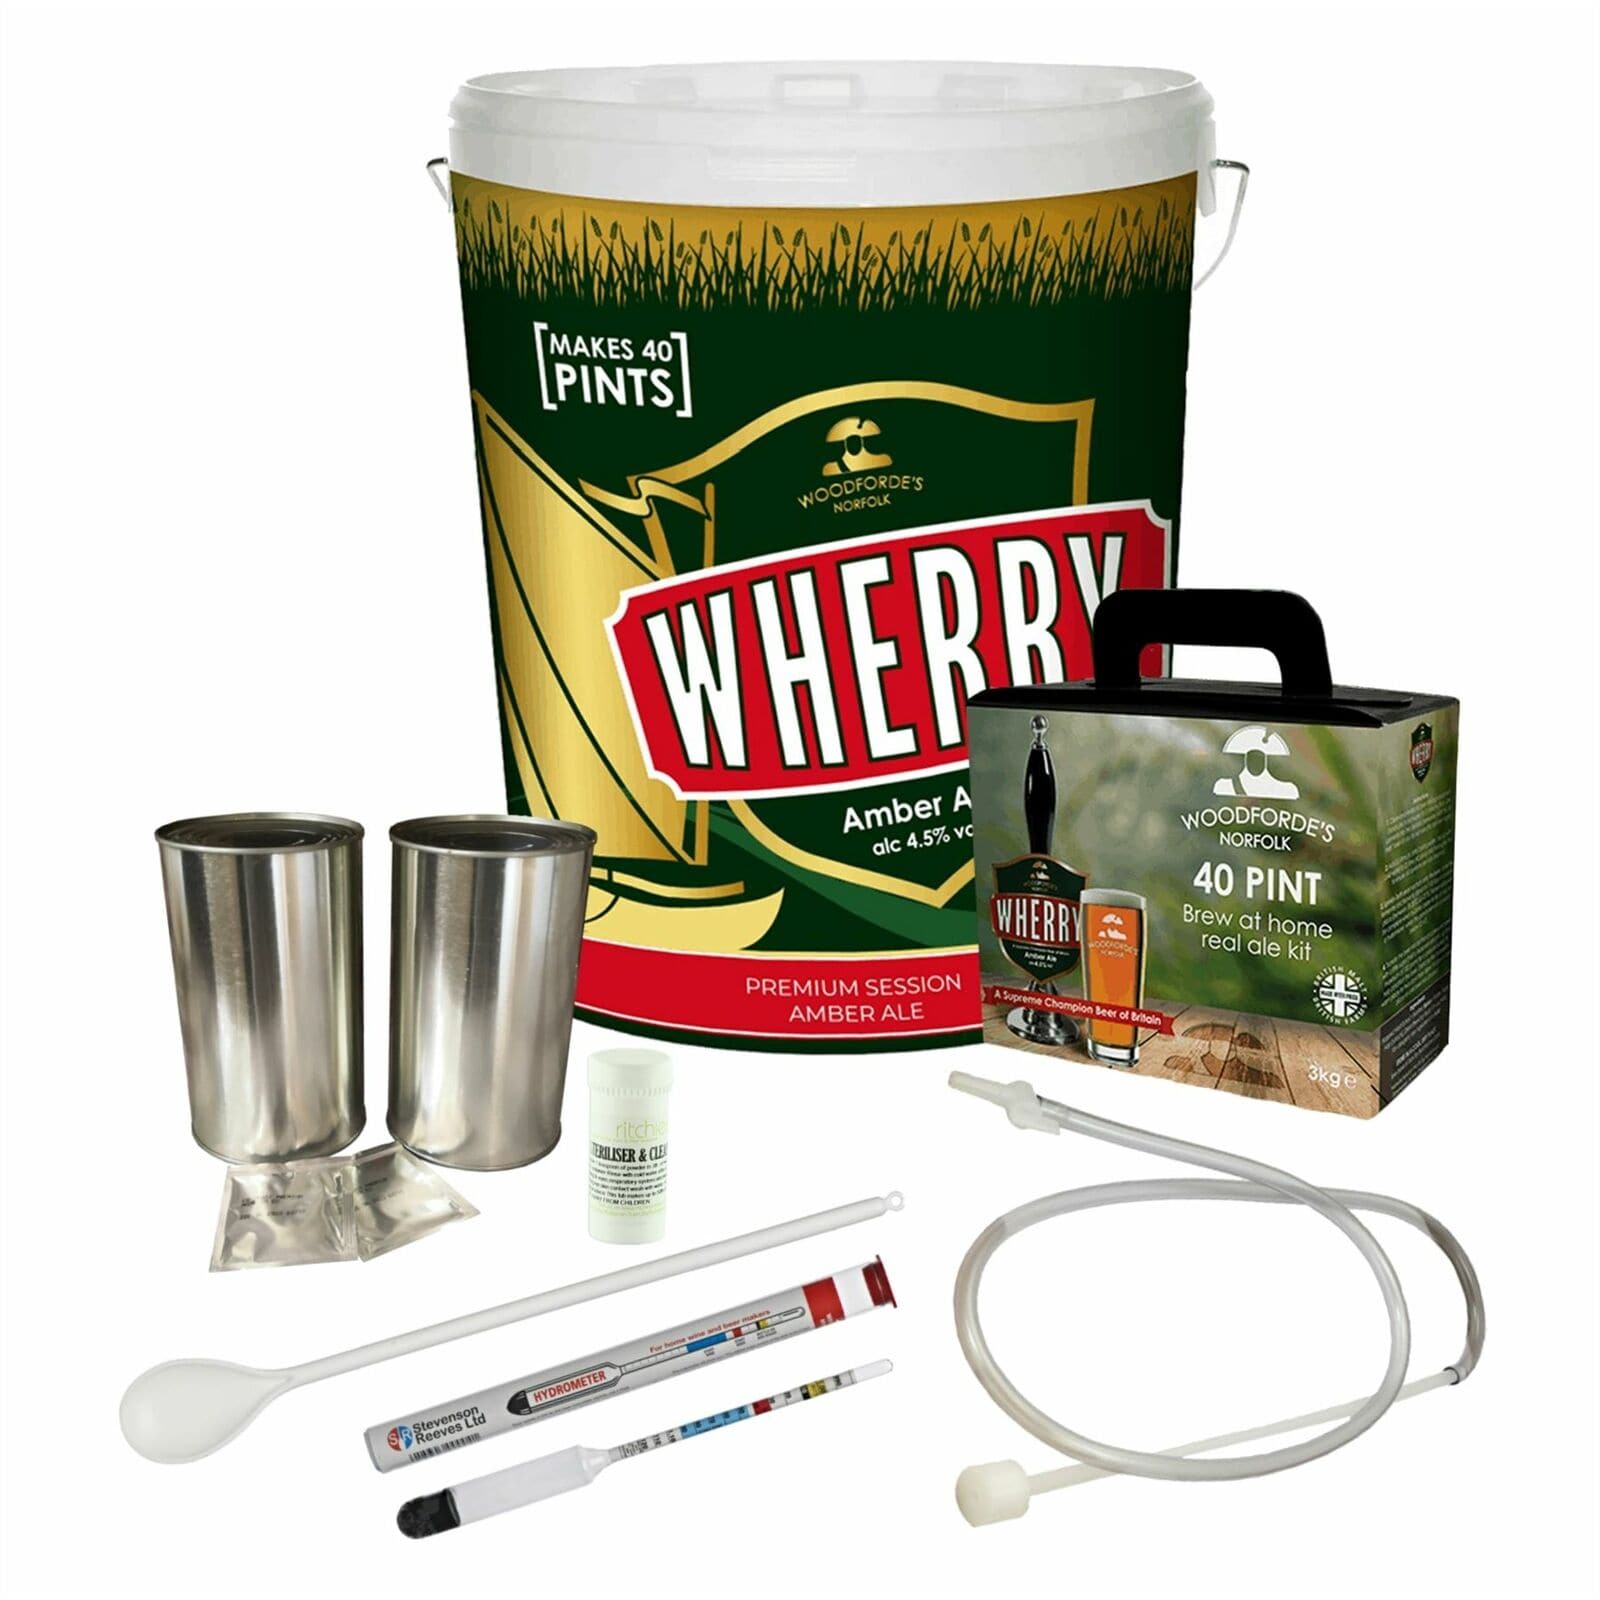 Woodfordes Wherry Home Brewery Starter Kit